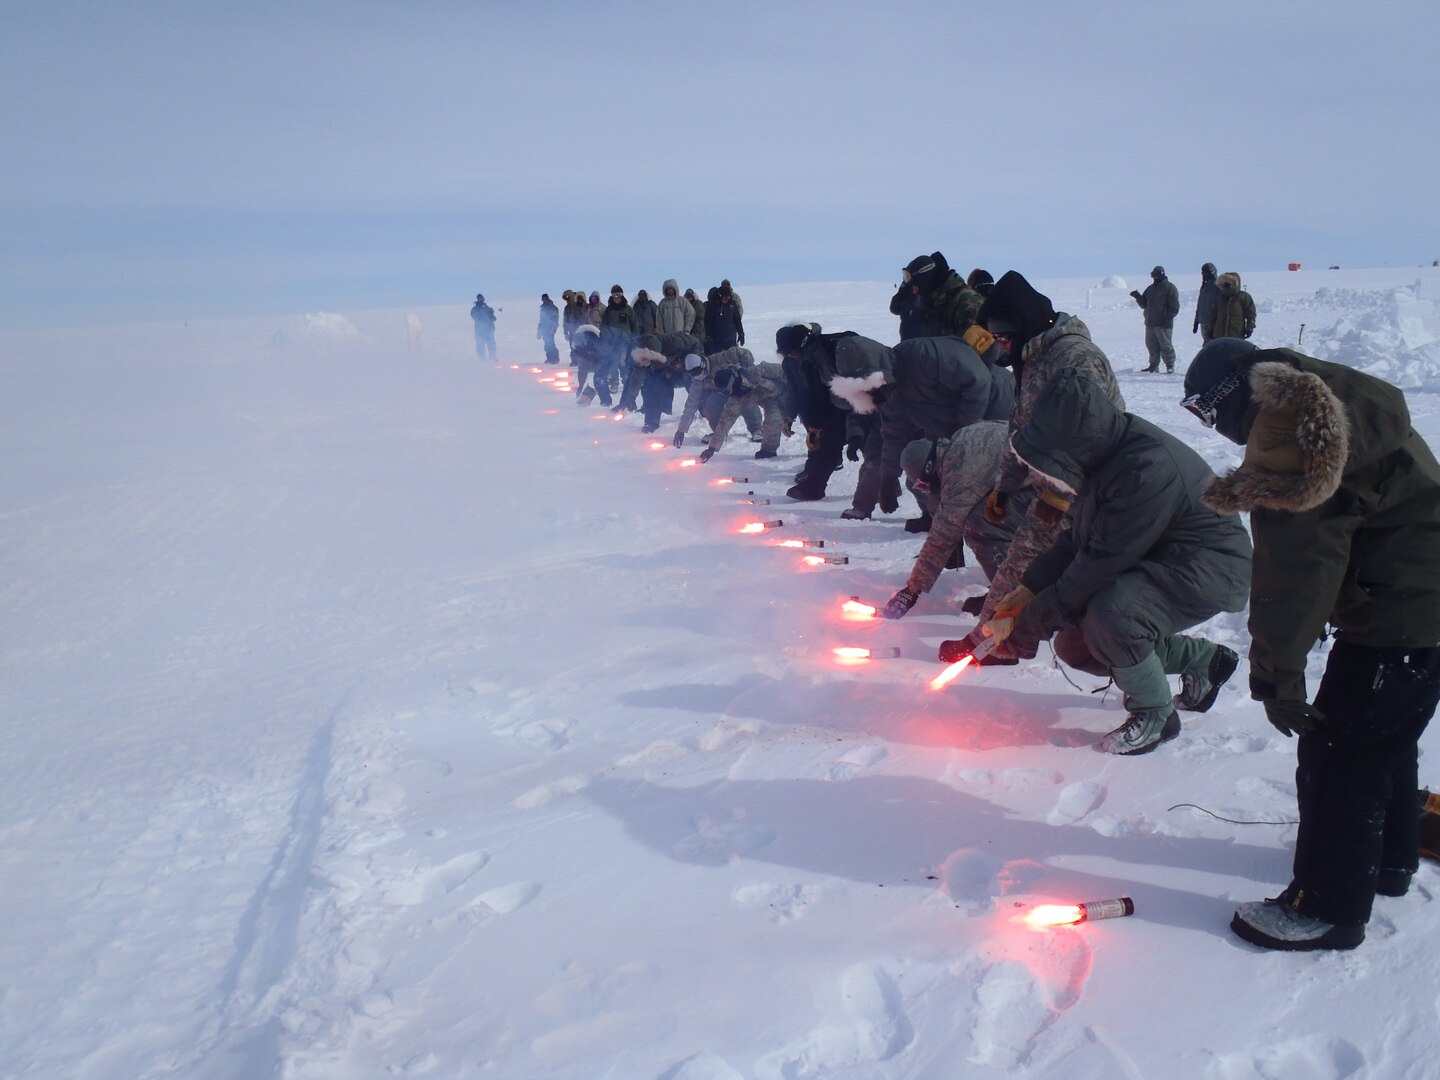 Airmen from the New York Air National Guard’s 109th Airlift Wing learn to use flares during Barren Land Arctic Survival Training at Raven Camp, Greenland.